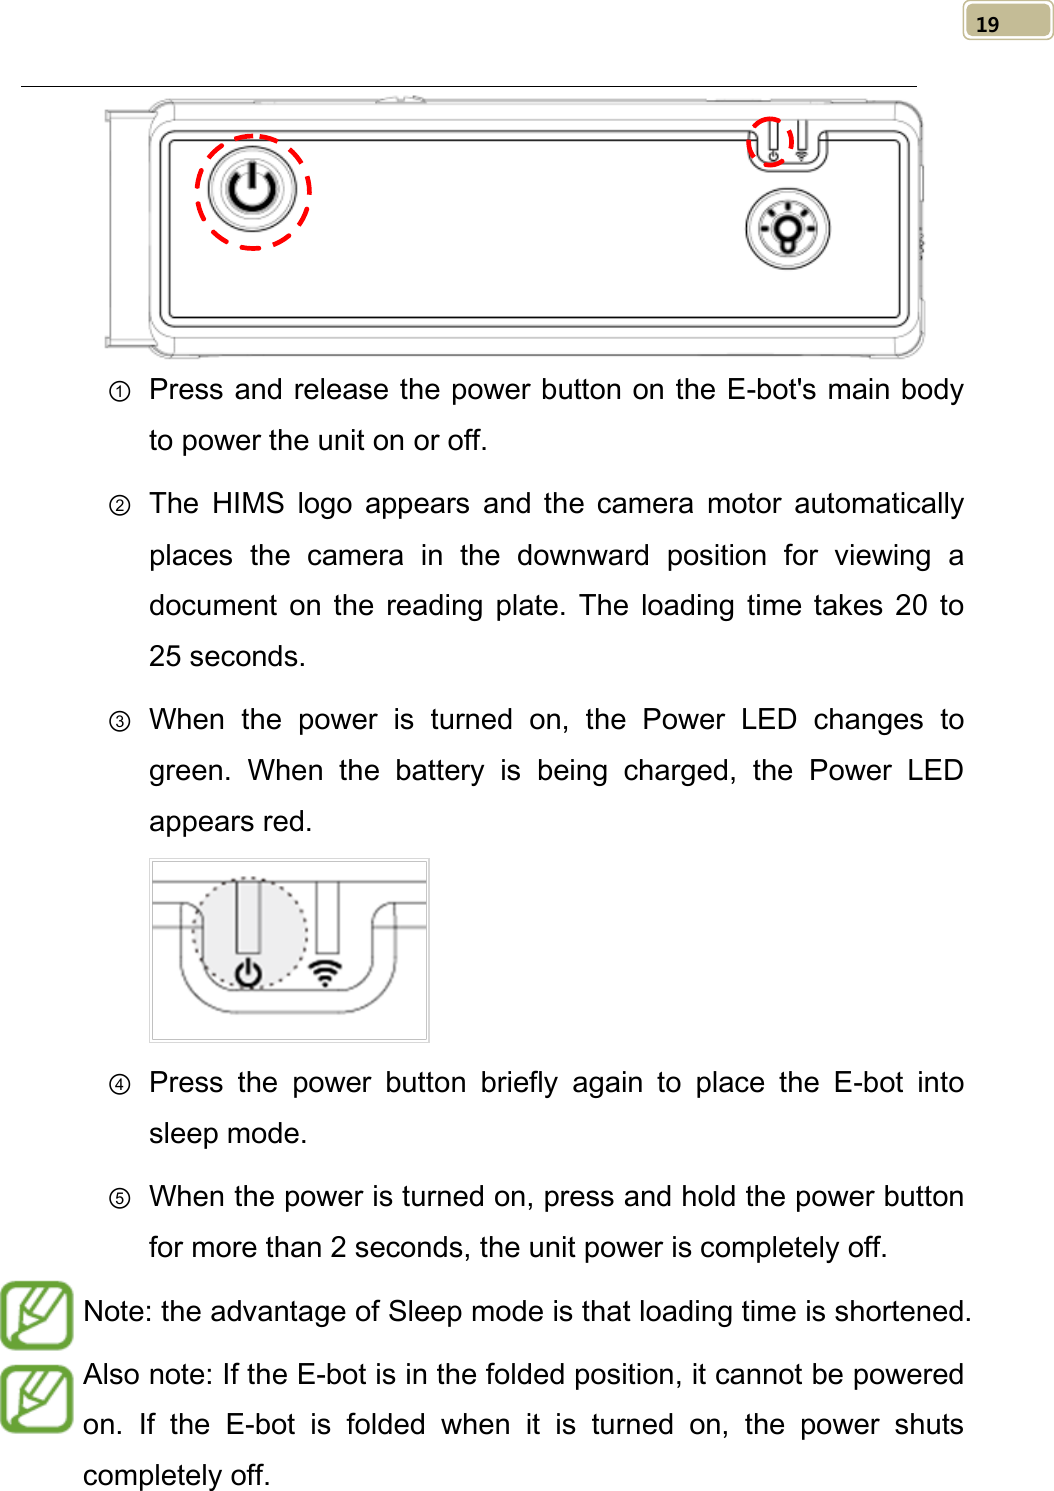   19  ① Press and release the power button on the E-bot&apos;s main body to power the unit on or off. ② The  HIMS logo appears and the camera motor automatically places the camera in the downward position for viewing a document on the reading plate.  The loading time takes 20 to 25 seconds. ③ When the power is turned on, the Power LED changes  to green. When the battery is being charged, the Power LED appears red.  ④ Press  the power button briefly again to place the E-bot into sleep mode. ⑤ When the power is turned on, press and hold the power button for more than 2 seconds, the unit power is completely off.   ⑥ Note: the advantage of Sleep mode is that loading time is shortened. Also note: If the E-bot is in the folded position, it cannot be powered on.  If the E-bot  is folded when it is turned on, the power shuts completely off. 